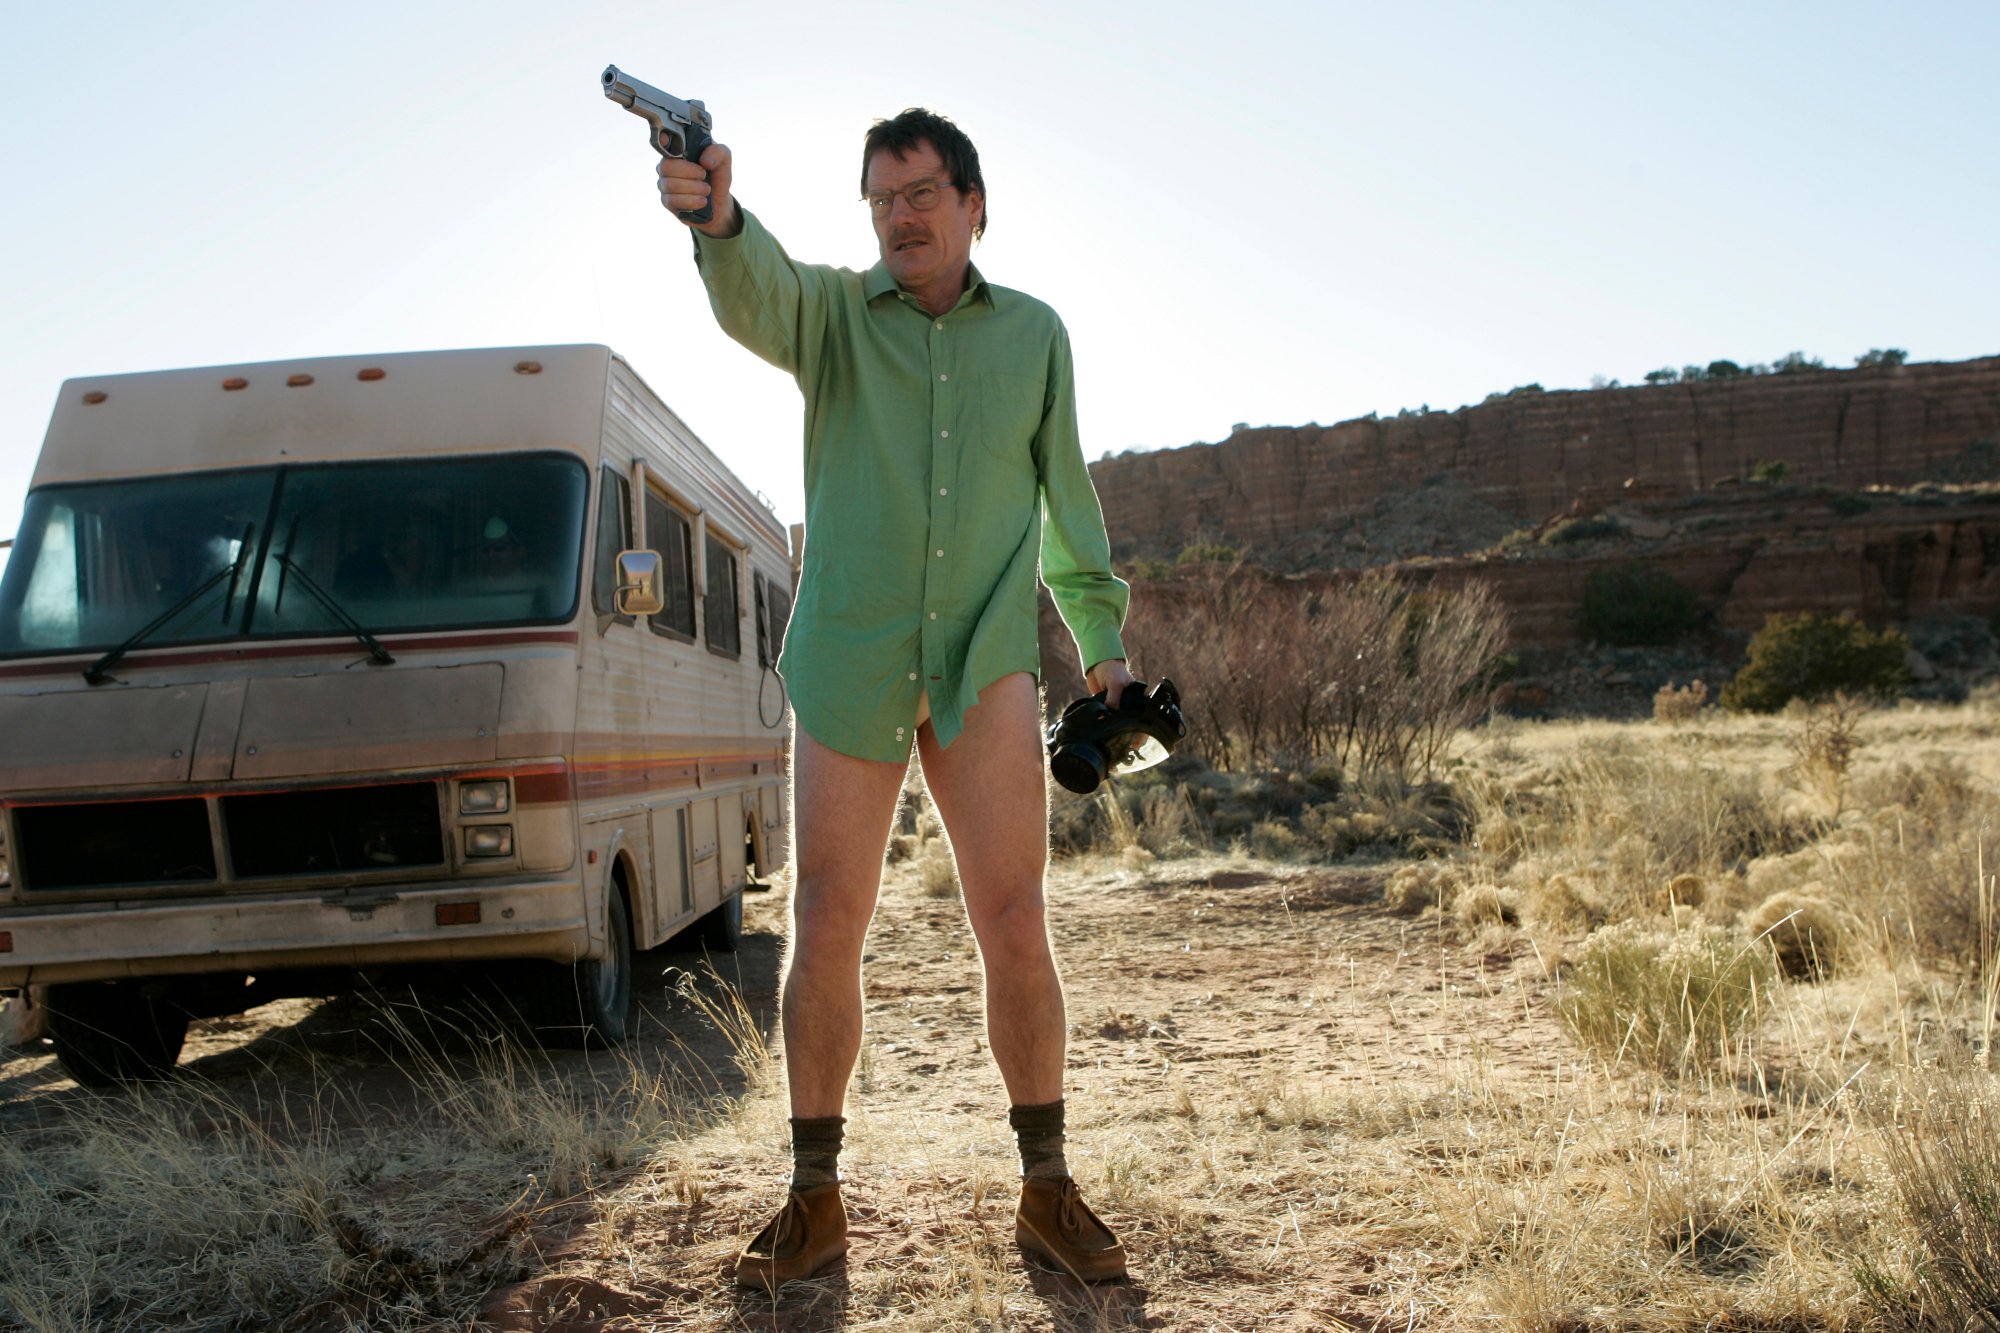 Bryan Cranston as Walter White in 'Breaking Bad' Season 1. He's wearing a green shirt and underwear and waving a gun. The early episodes of 'Breaking Bad' show him fumbling in his meth-making efforts before he pushes beyond redemption later on.